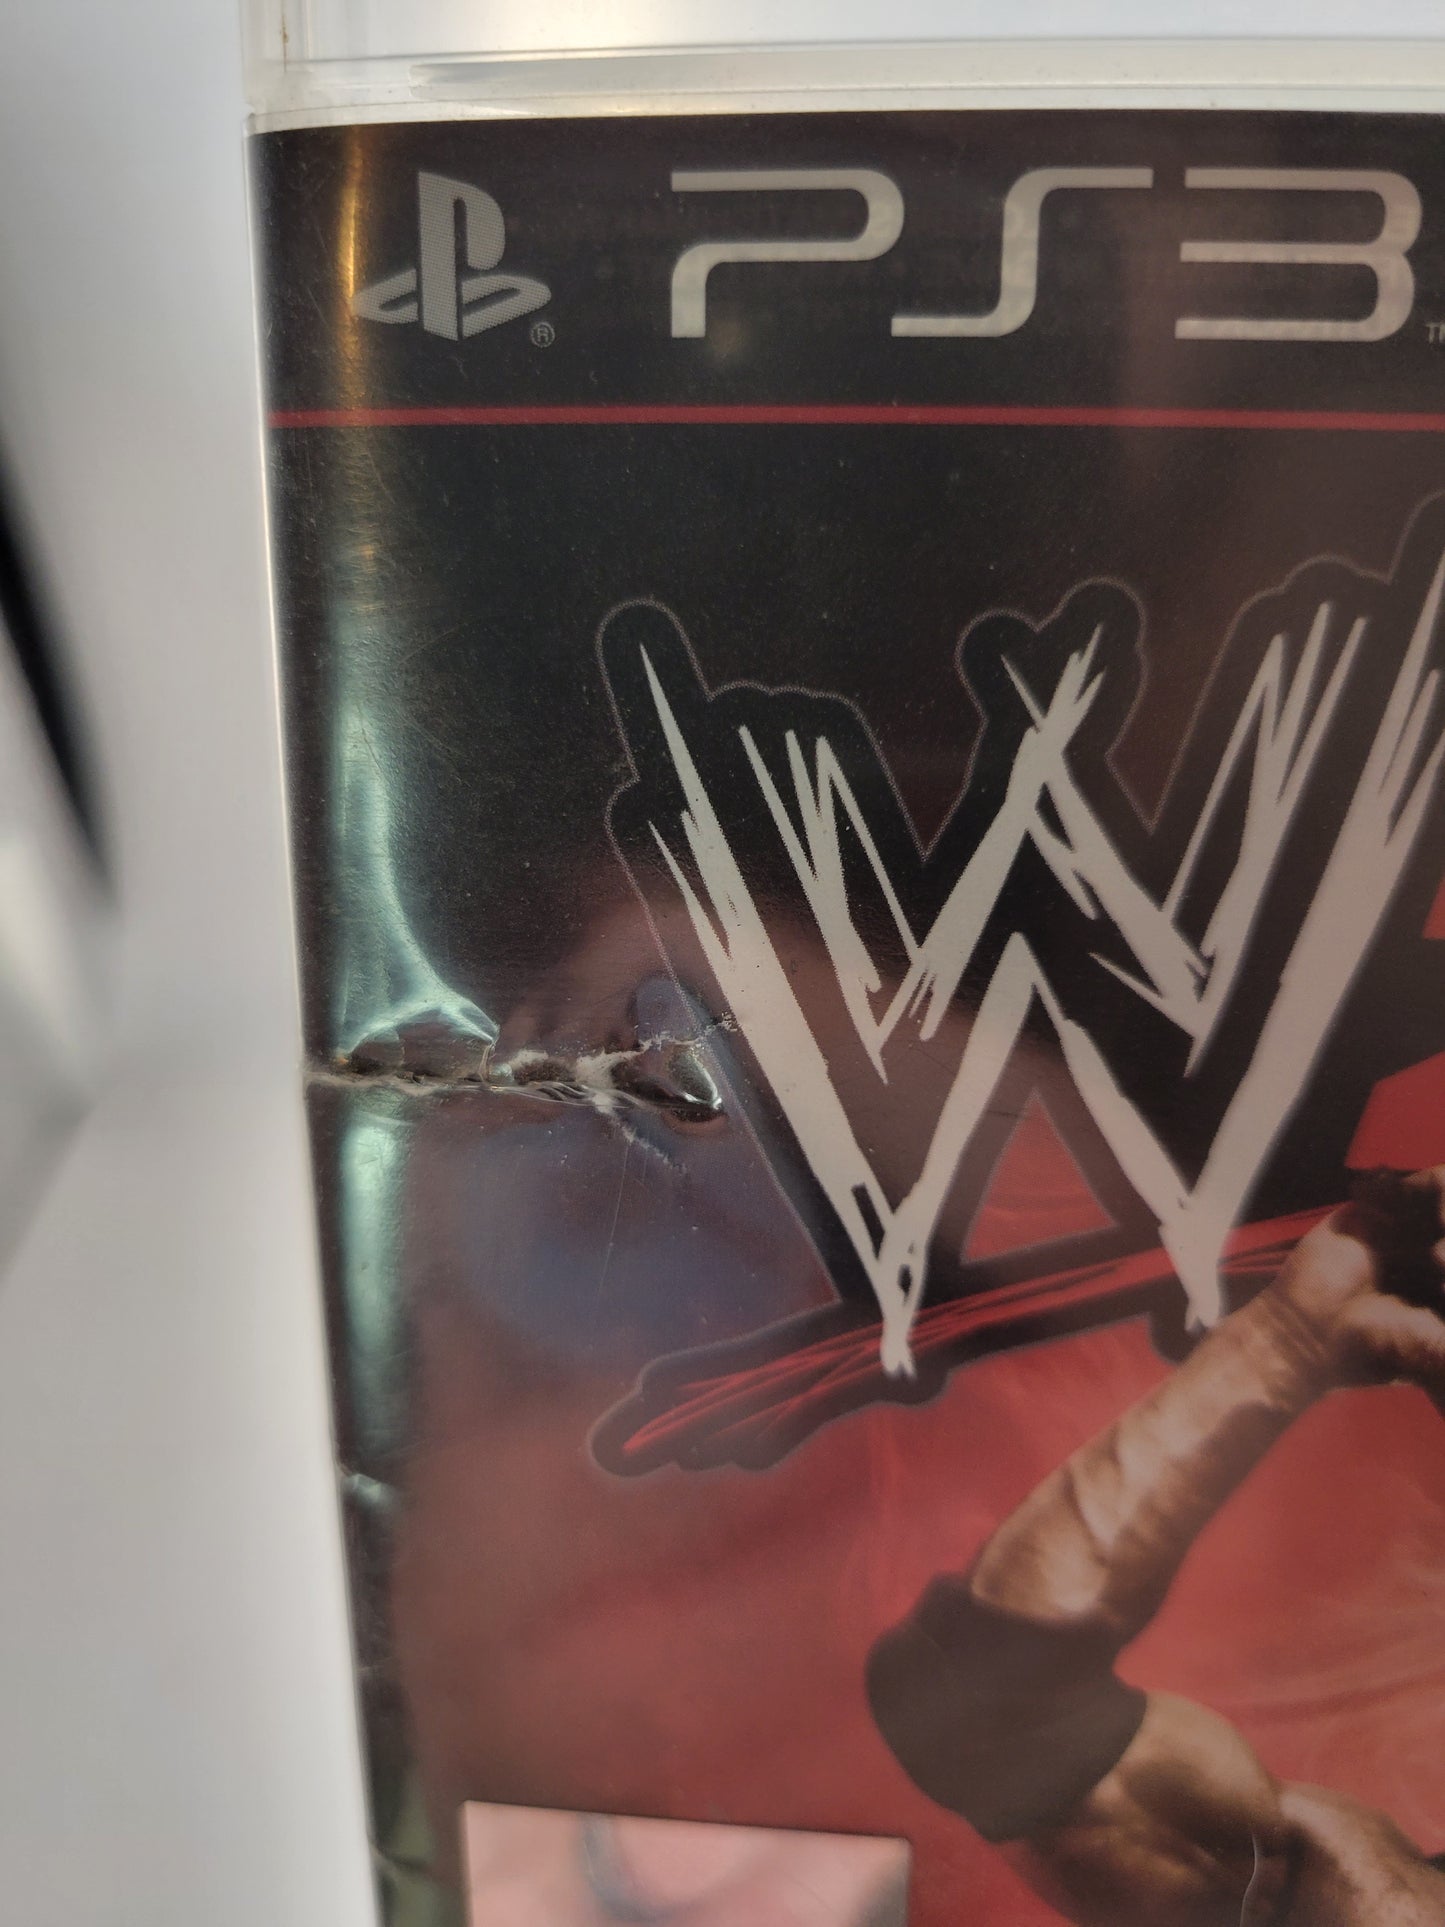 Sony Playstation 3 WWE 2K14  Video Game